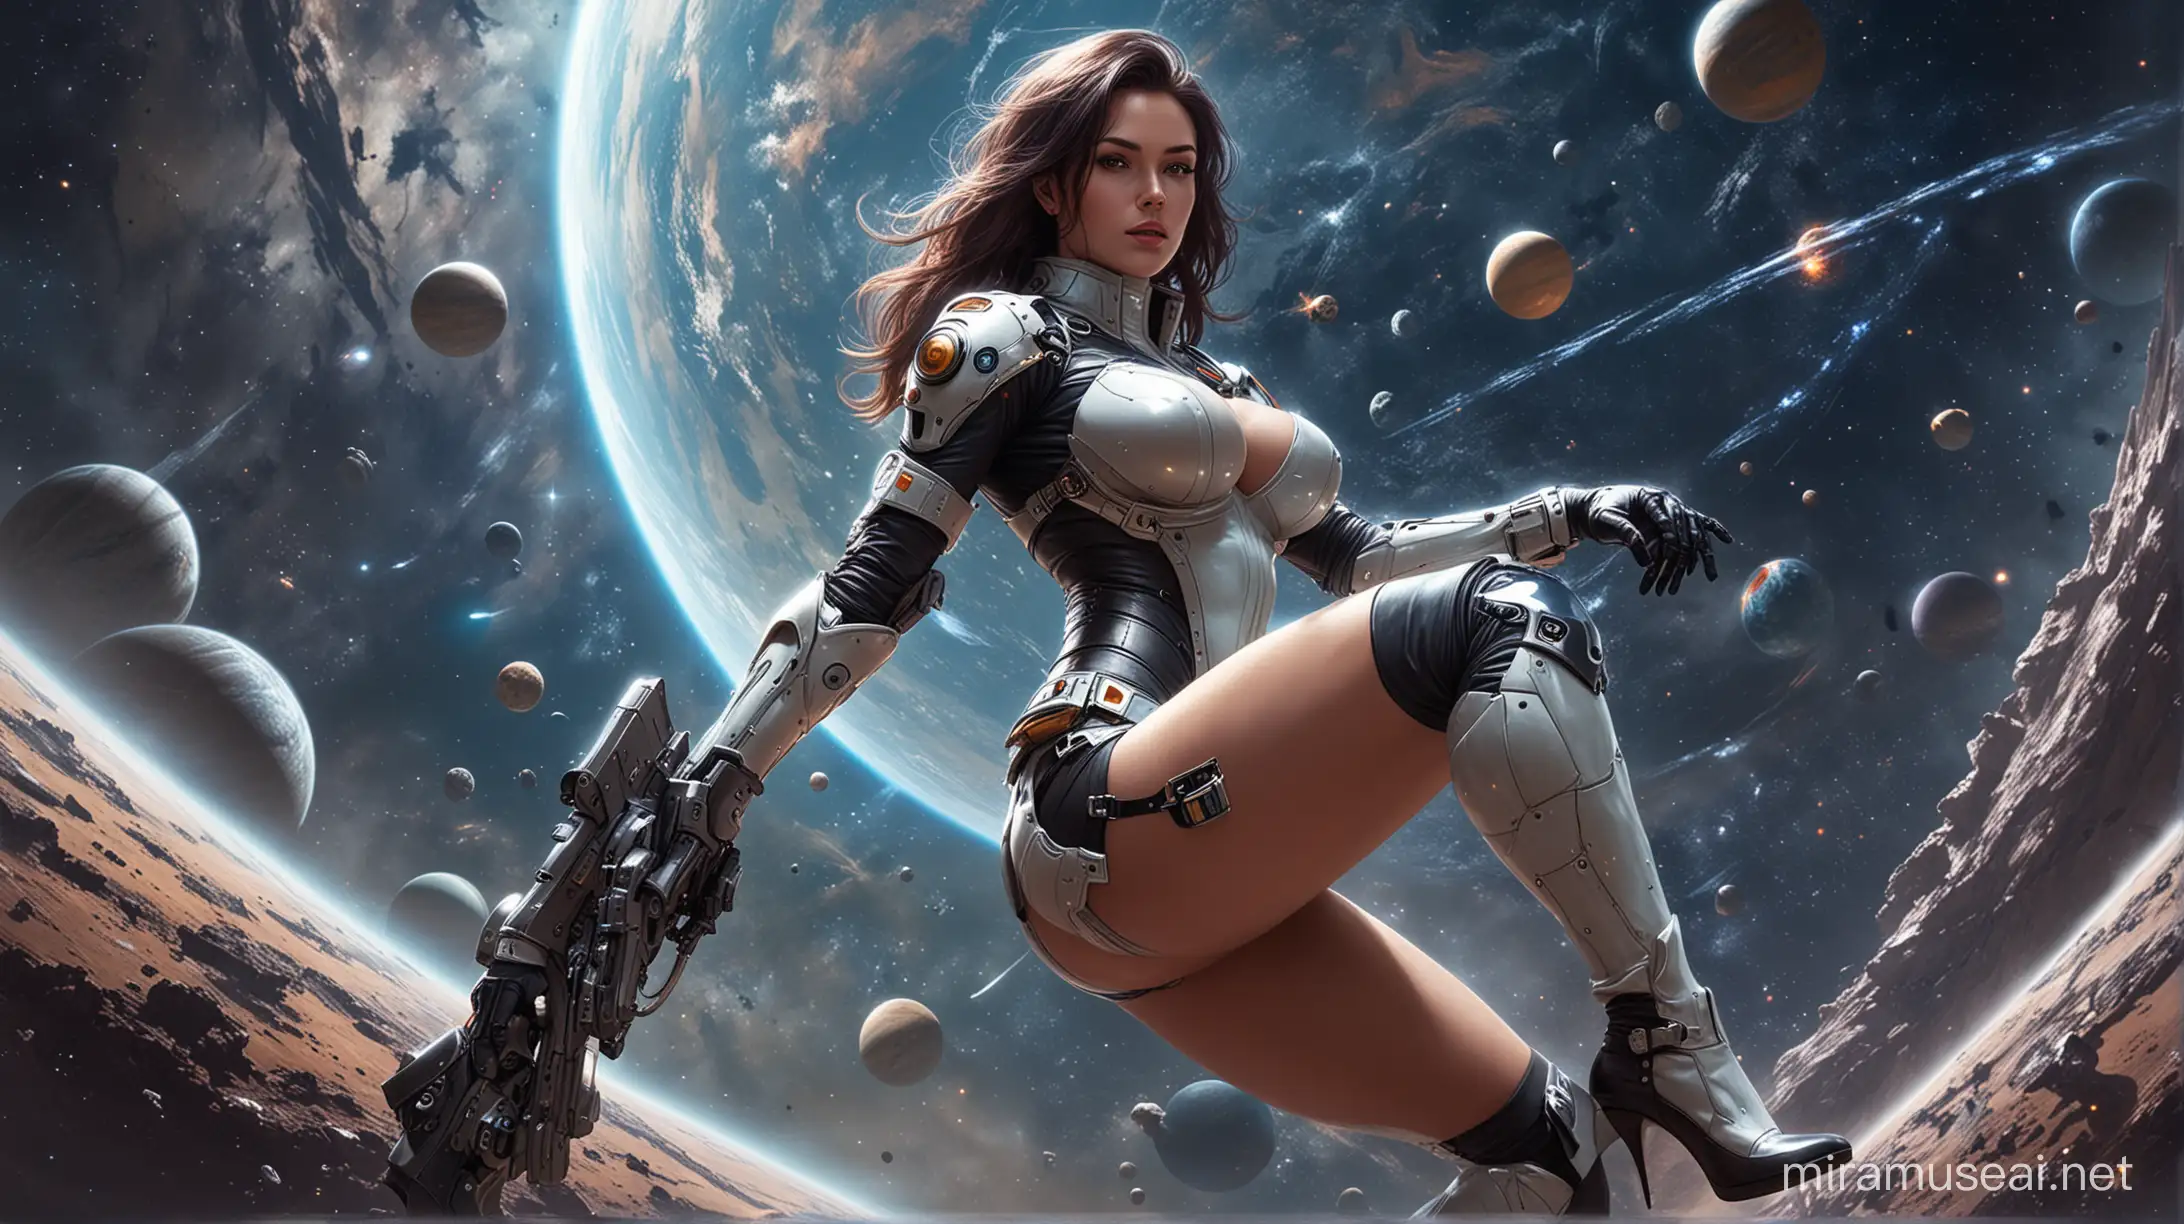 big titted space cowboy girl, tight spacesuit, armored spacesuit, round butt, high heels, space, planets, galaxies